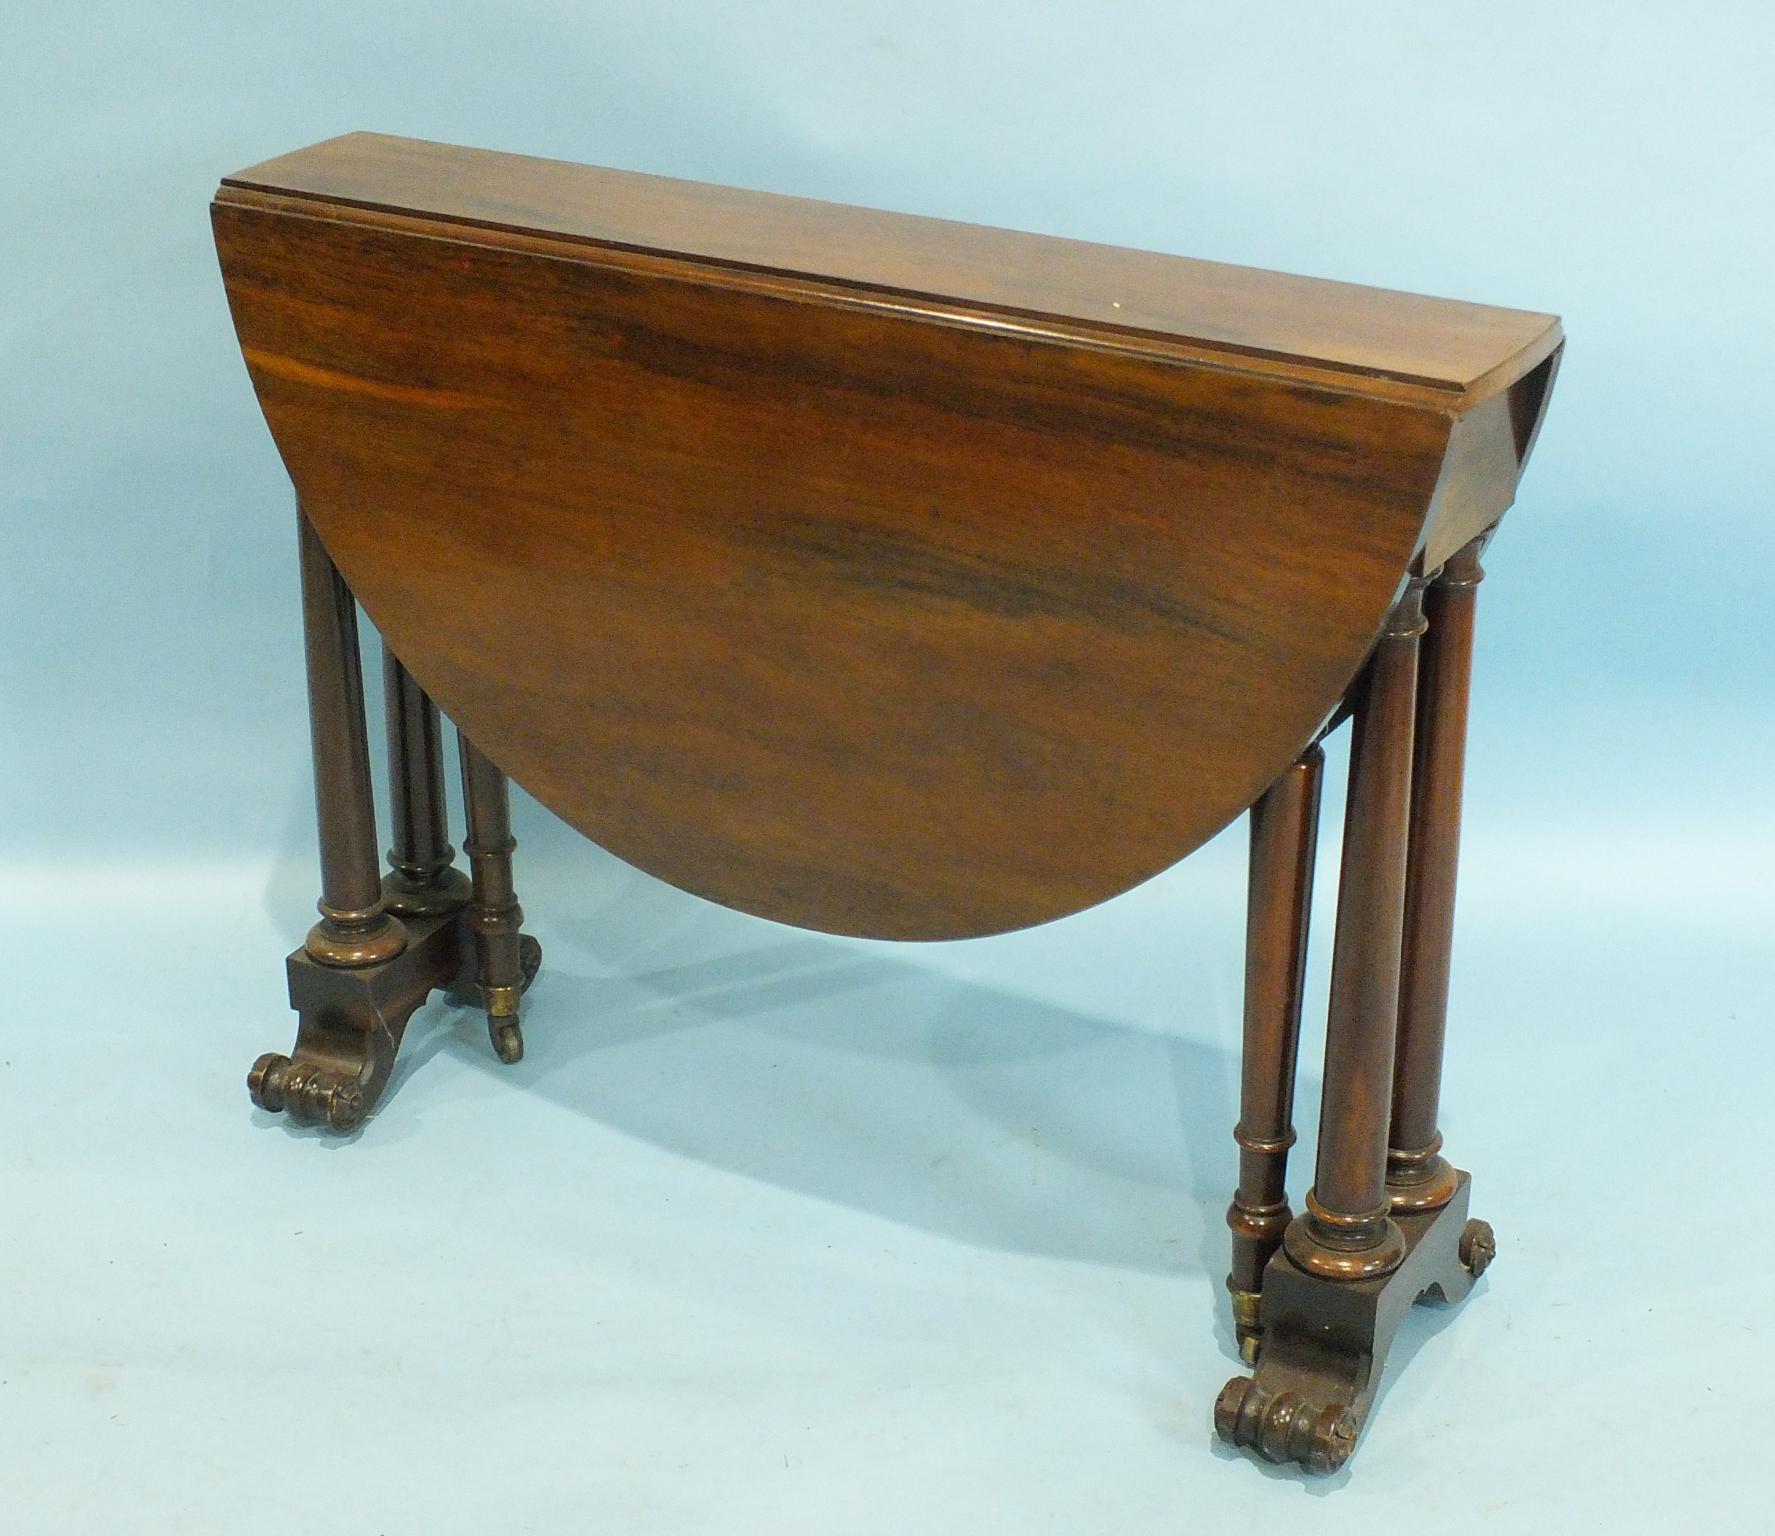 A Victorian rosewood drop-leaf Sutherland table with a pair of oval drop leaves, on turned legs